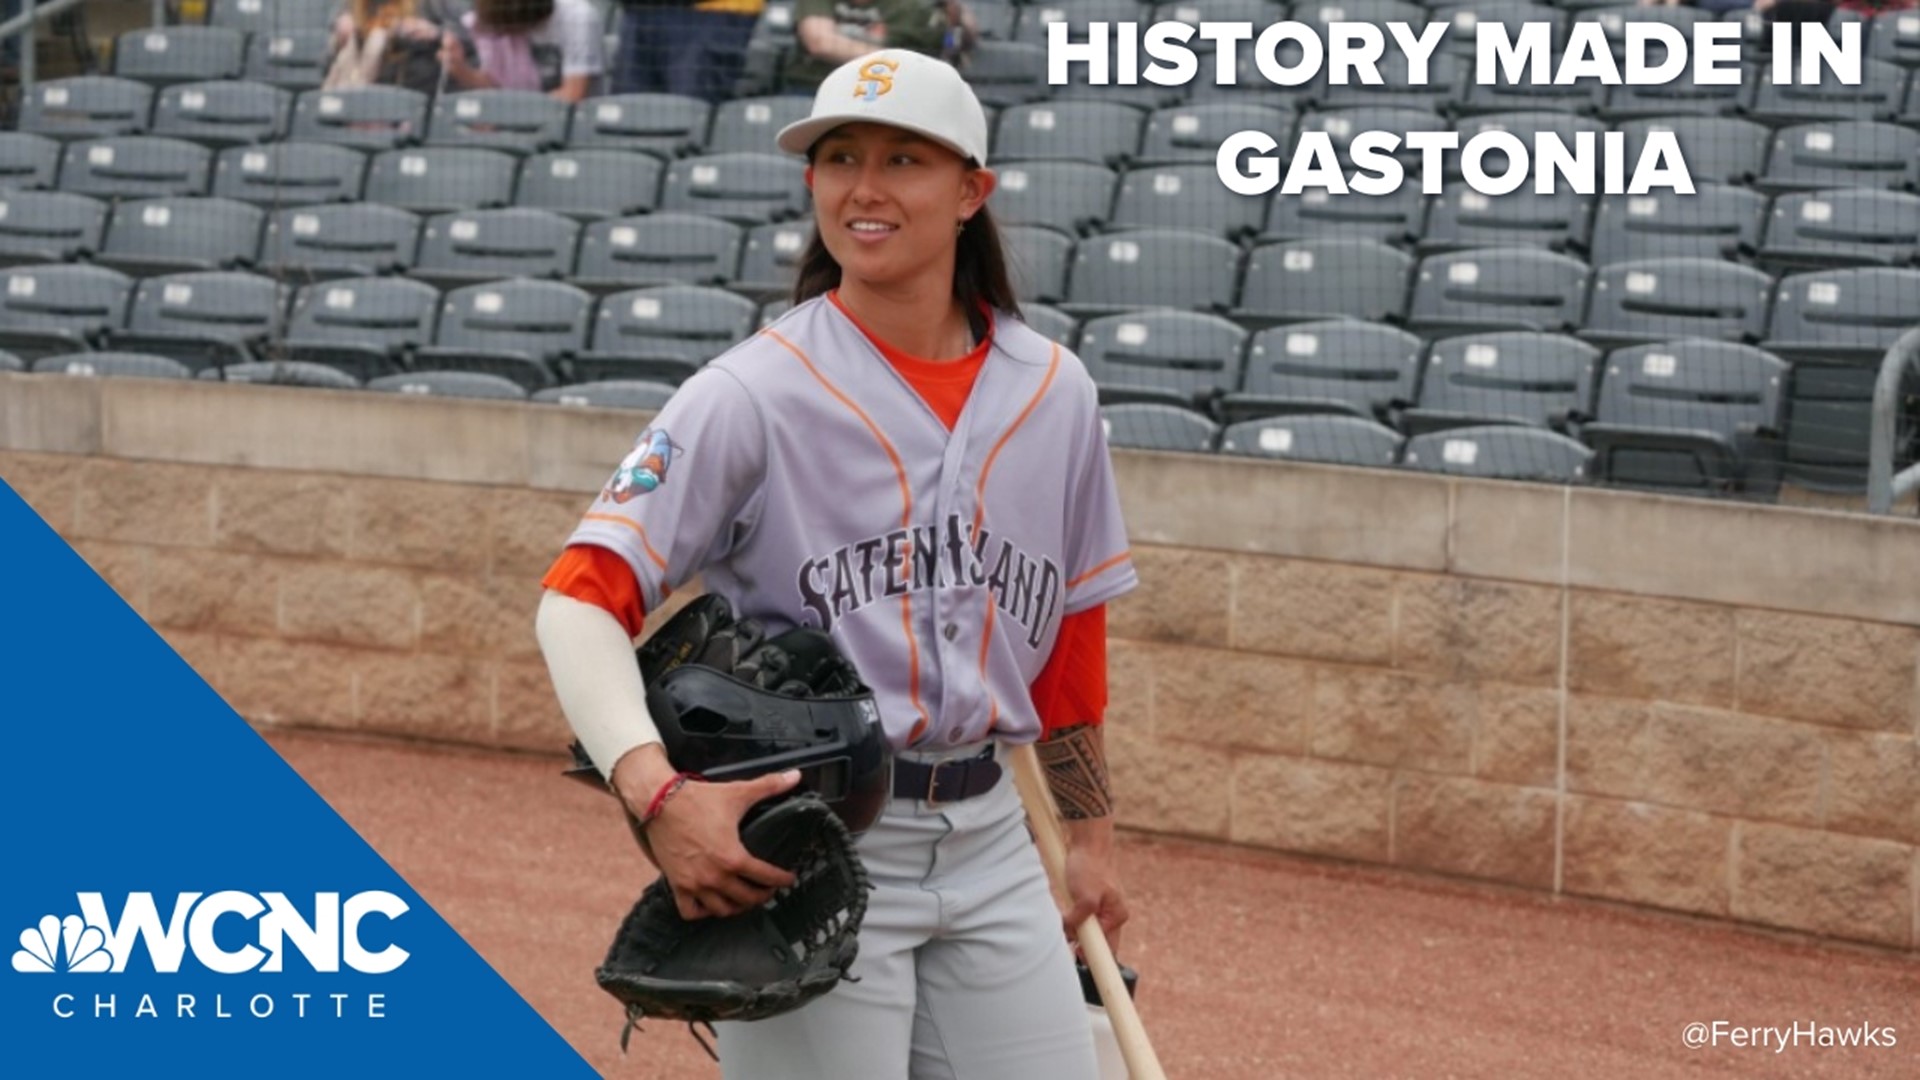 Kelsie Whitmore plays for the Staten Island FerryHawks and played against the Gastonia Honey Hunters on May 1.